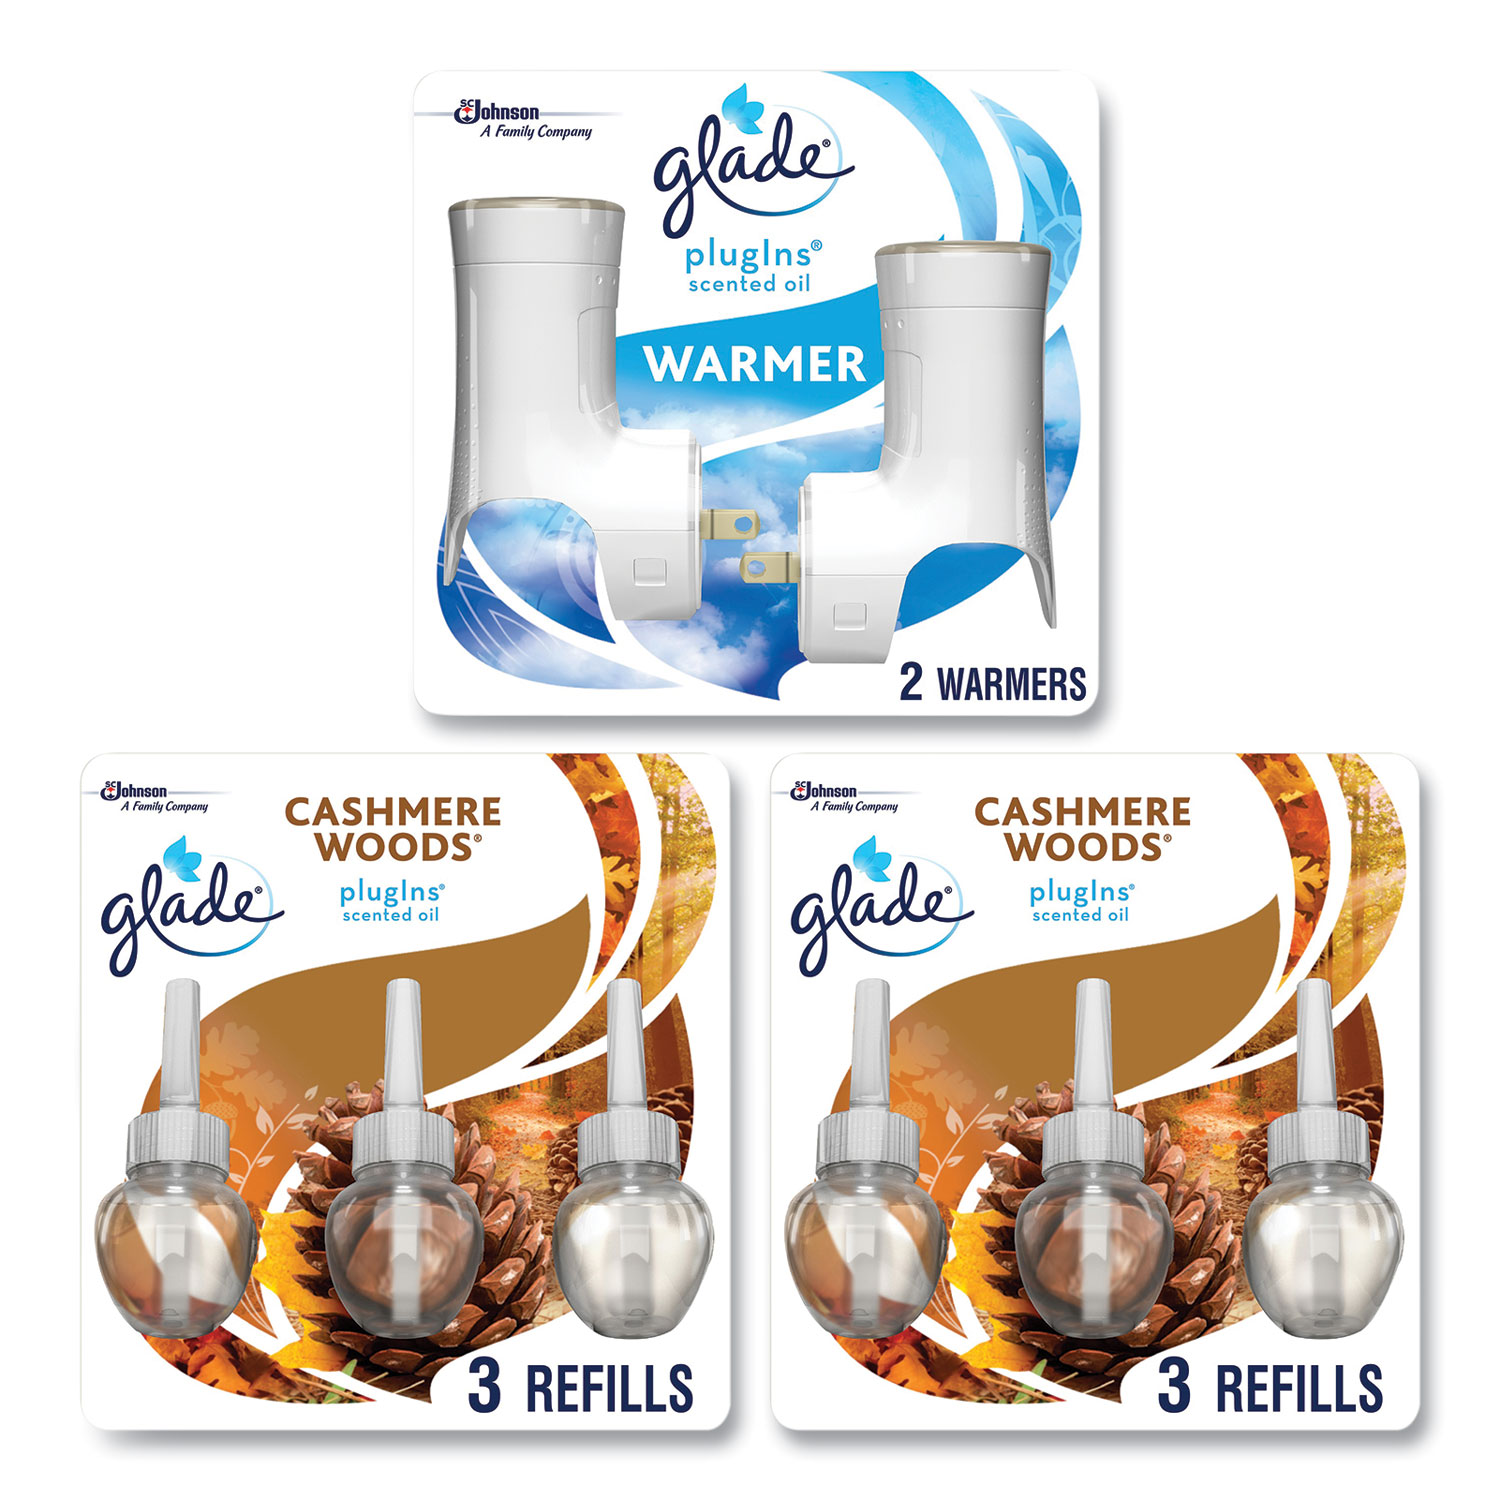  Glade 319965 Plugin Scented Oil, Cashmere Woods, 0.67 oz, 2 Warmers and 6 Refills/Pack (SJN24429115) 